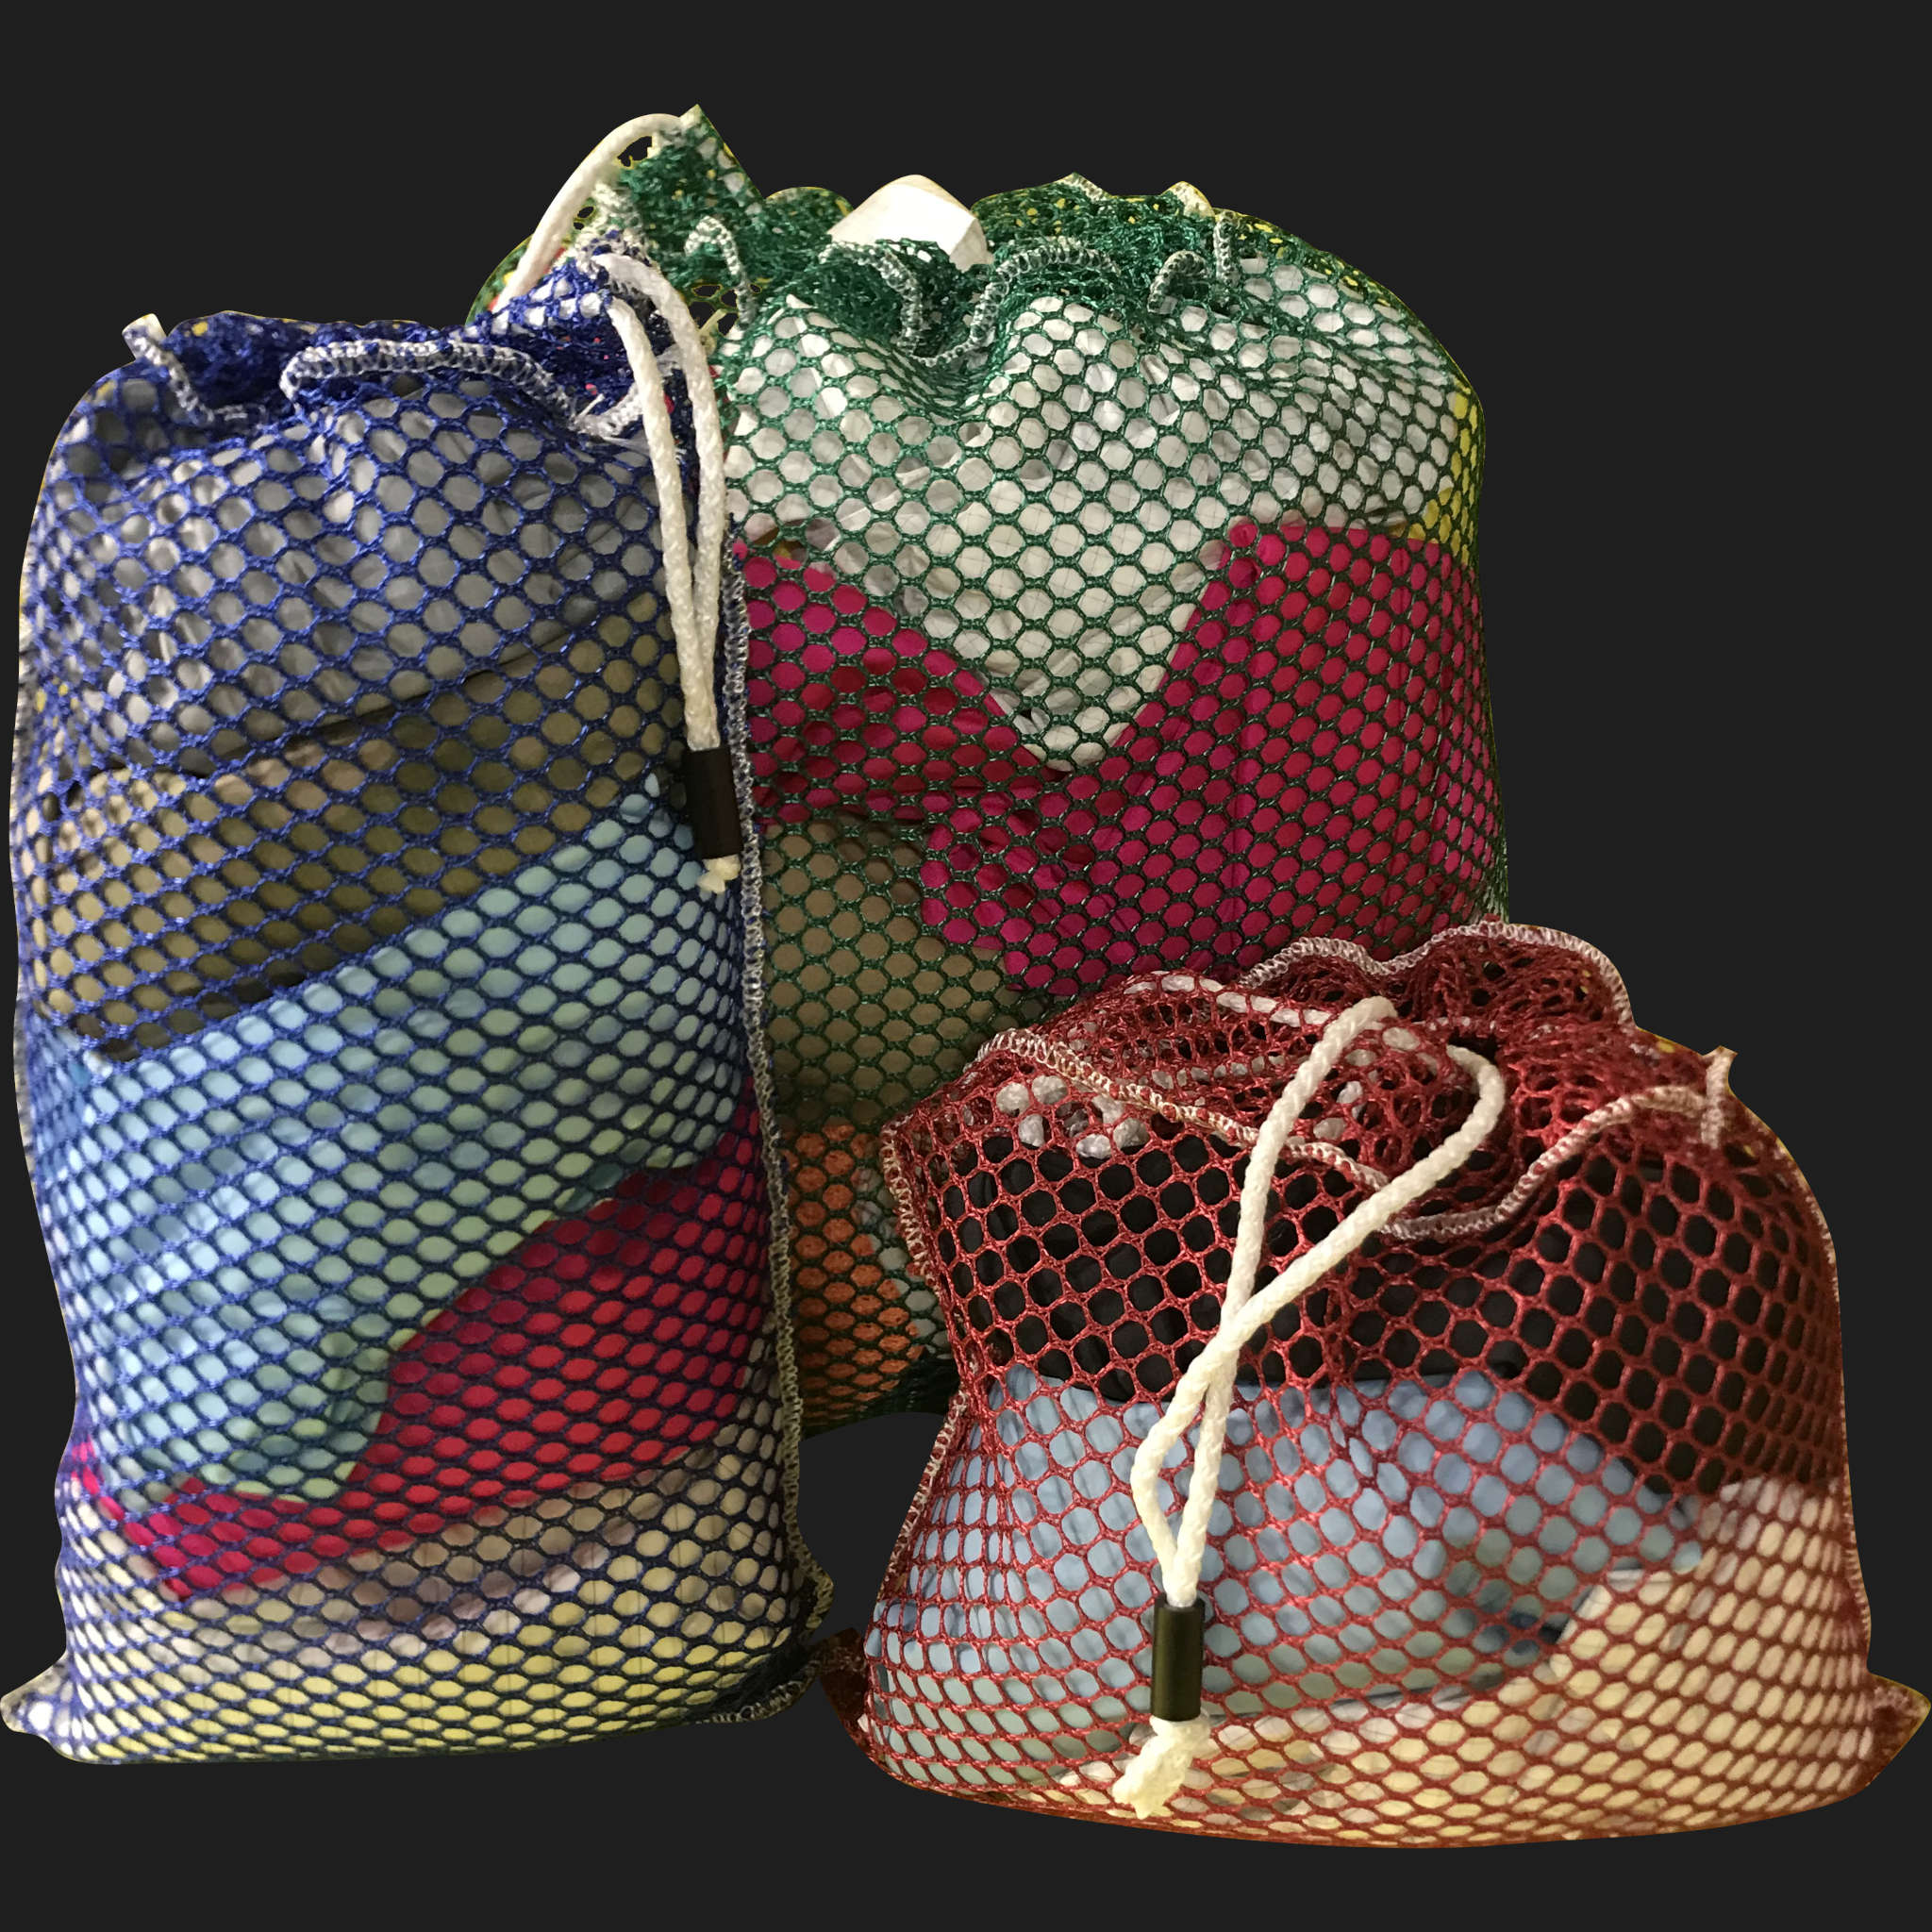 30" x 54" Customized Mesh-Net-Laundry Bags Heavy Duty with Cord and barrellock closure